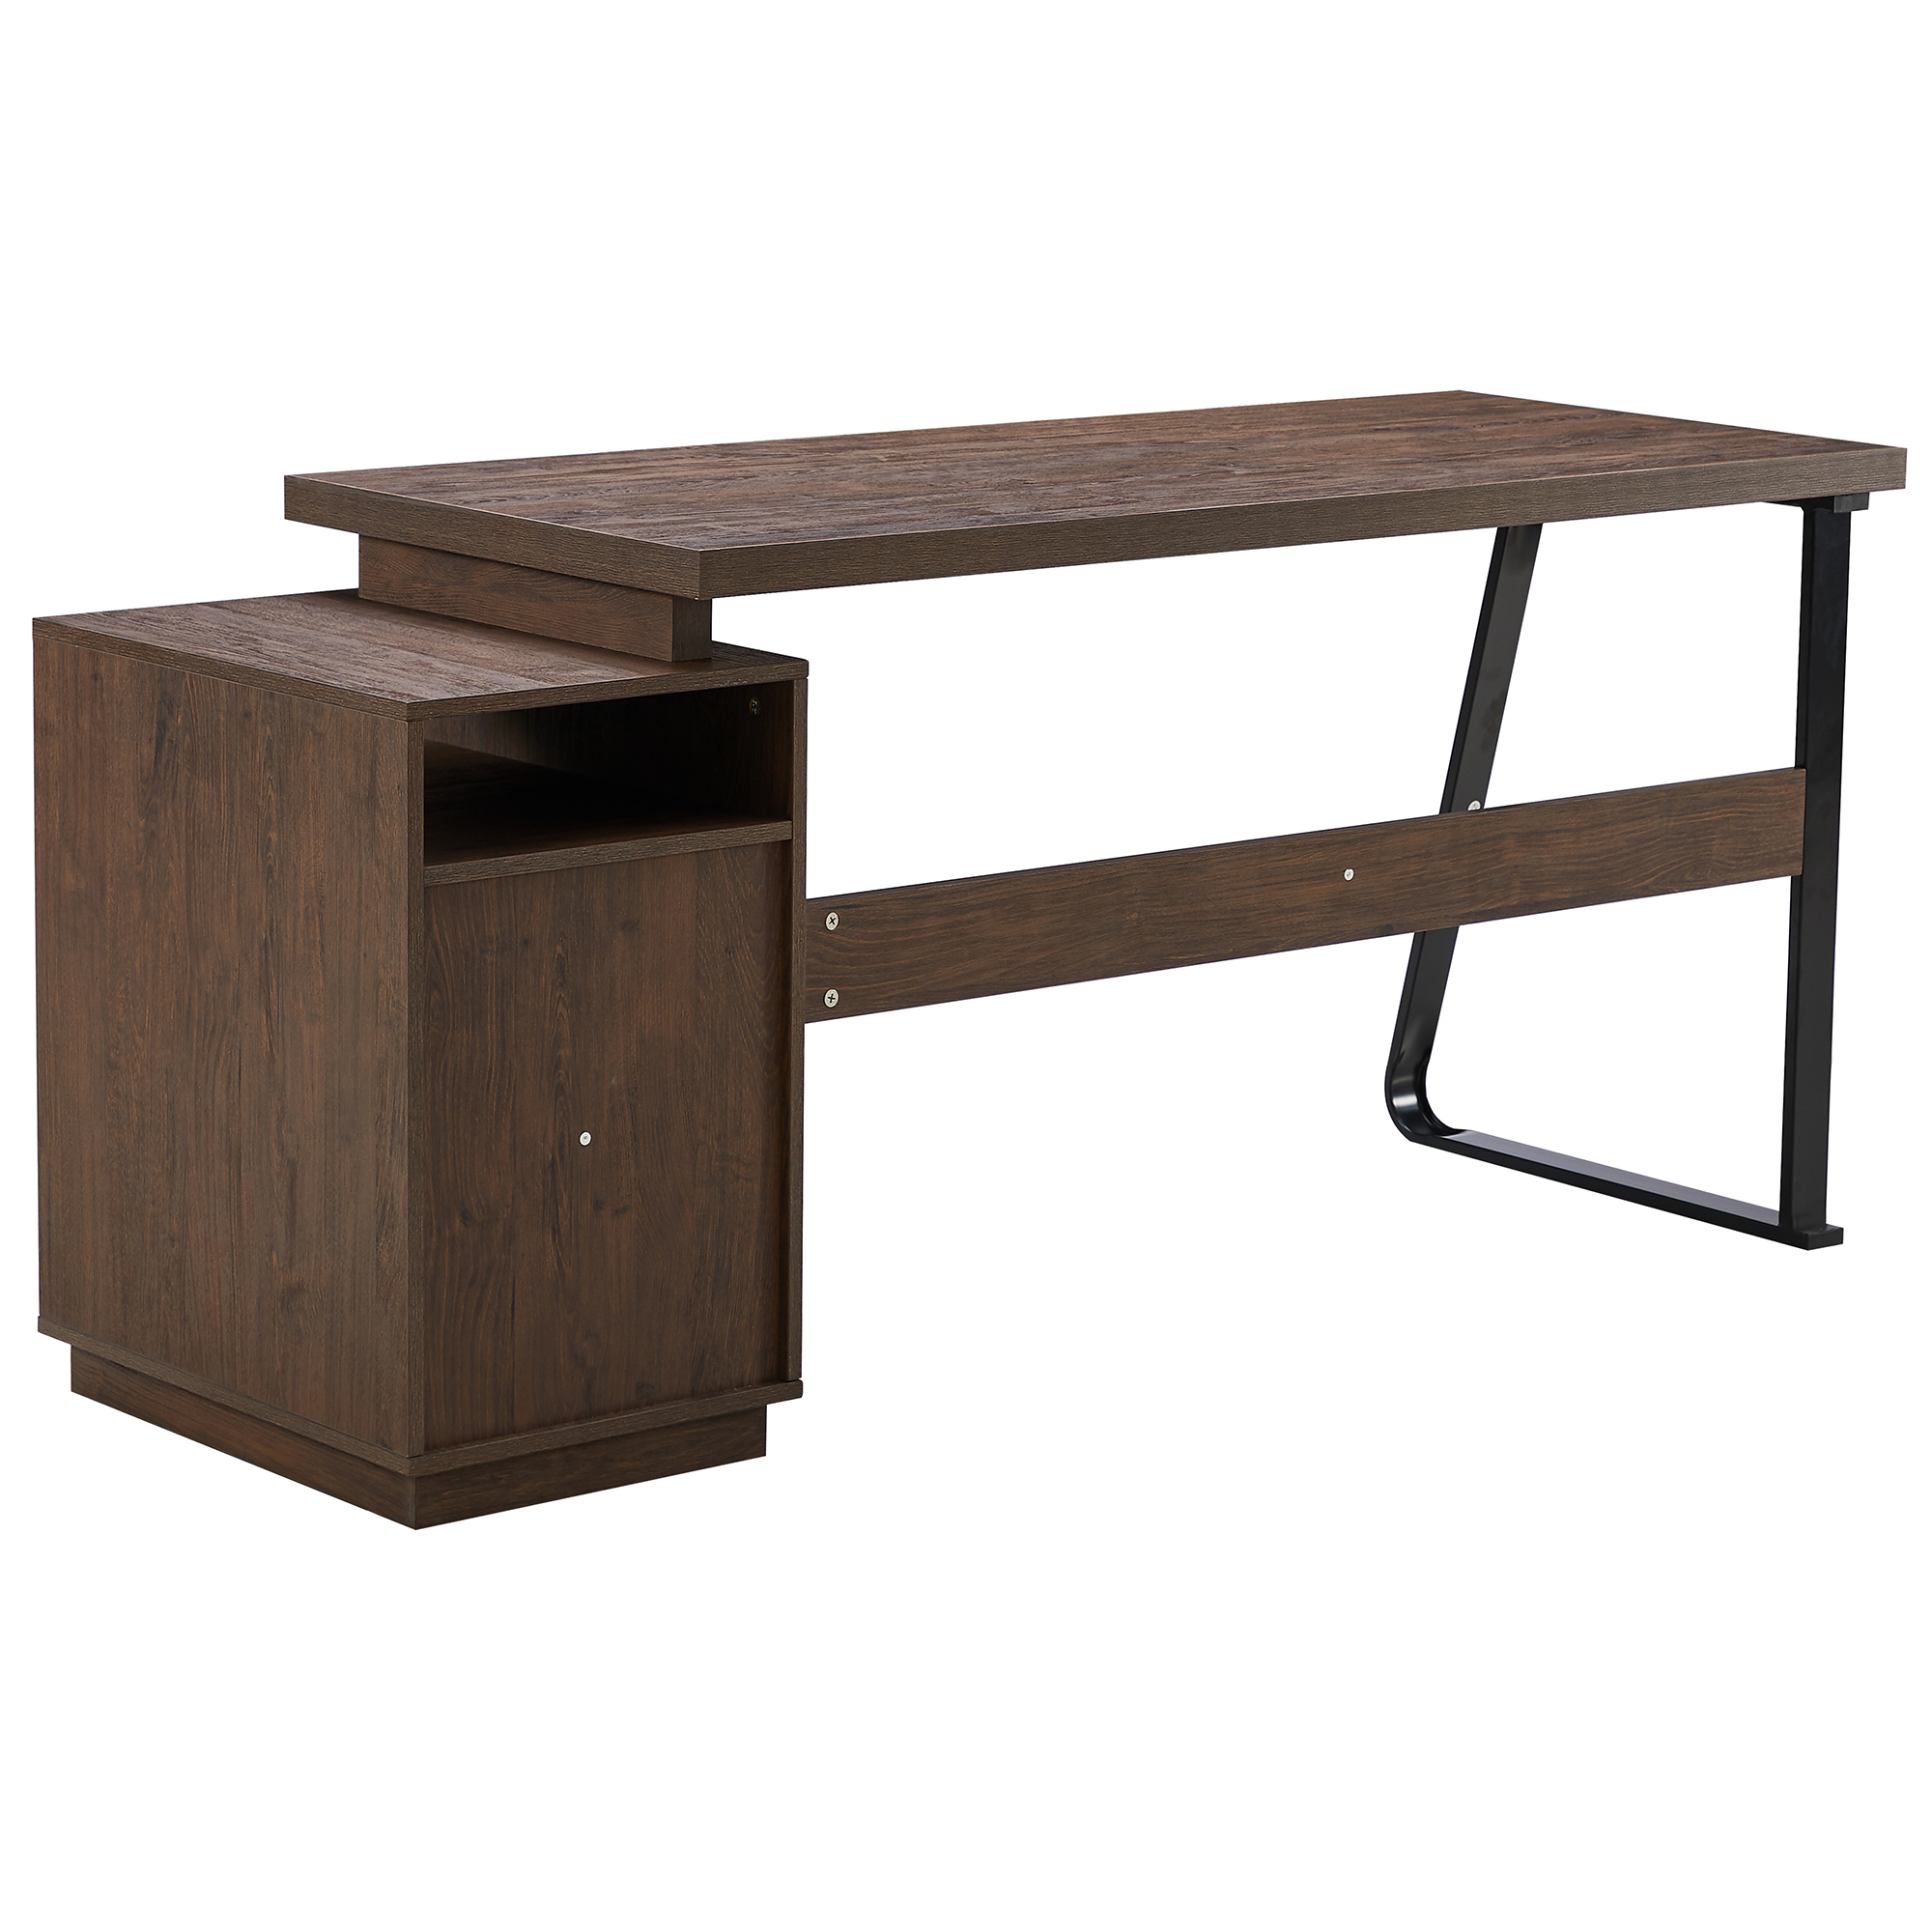 65" Writing Study Table With Drawers - WF195577AAD